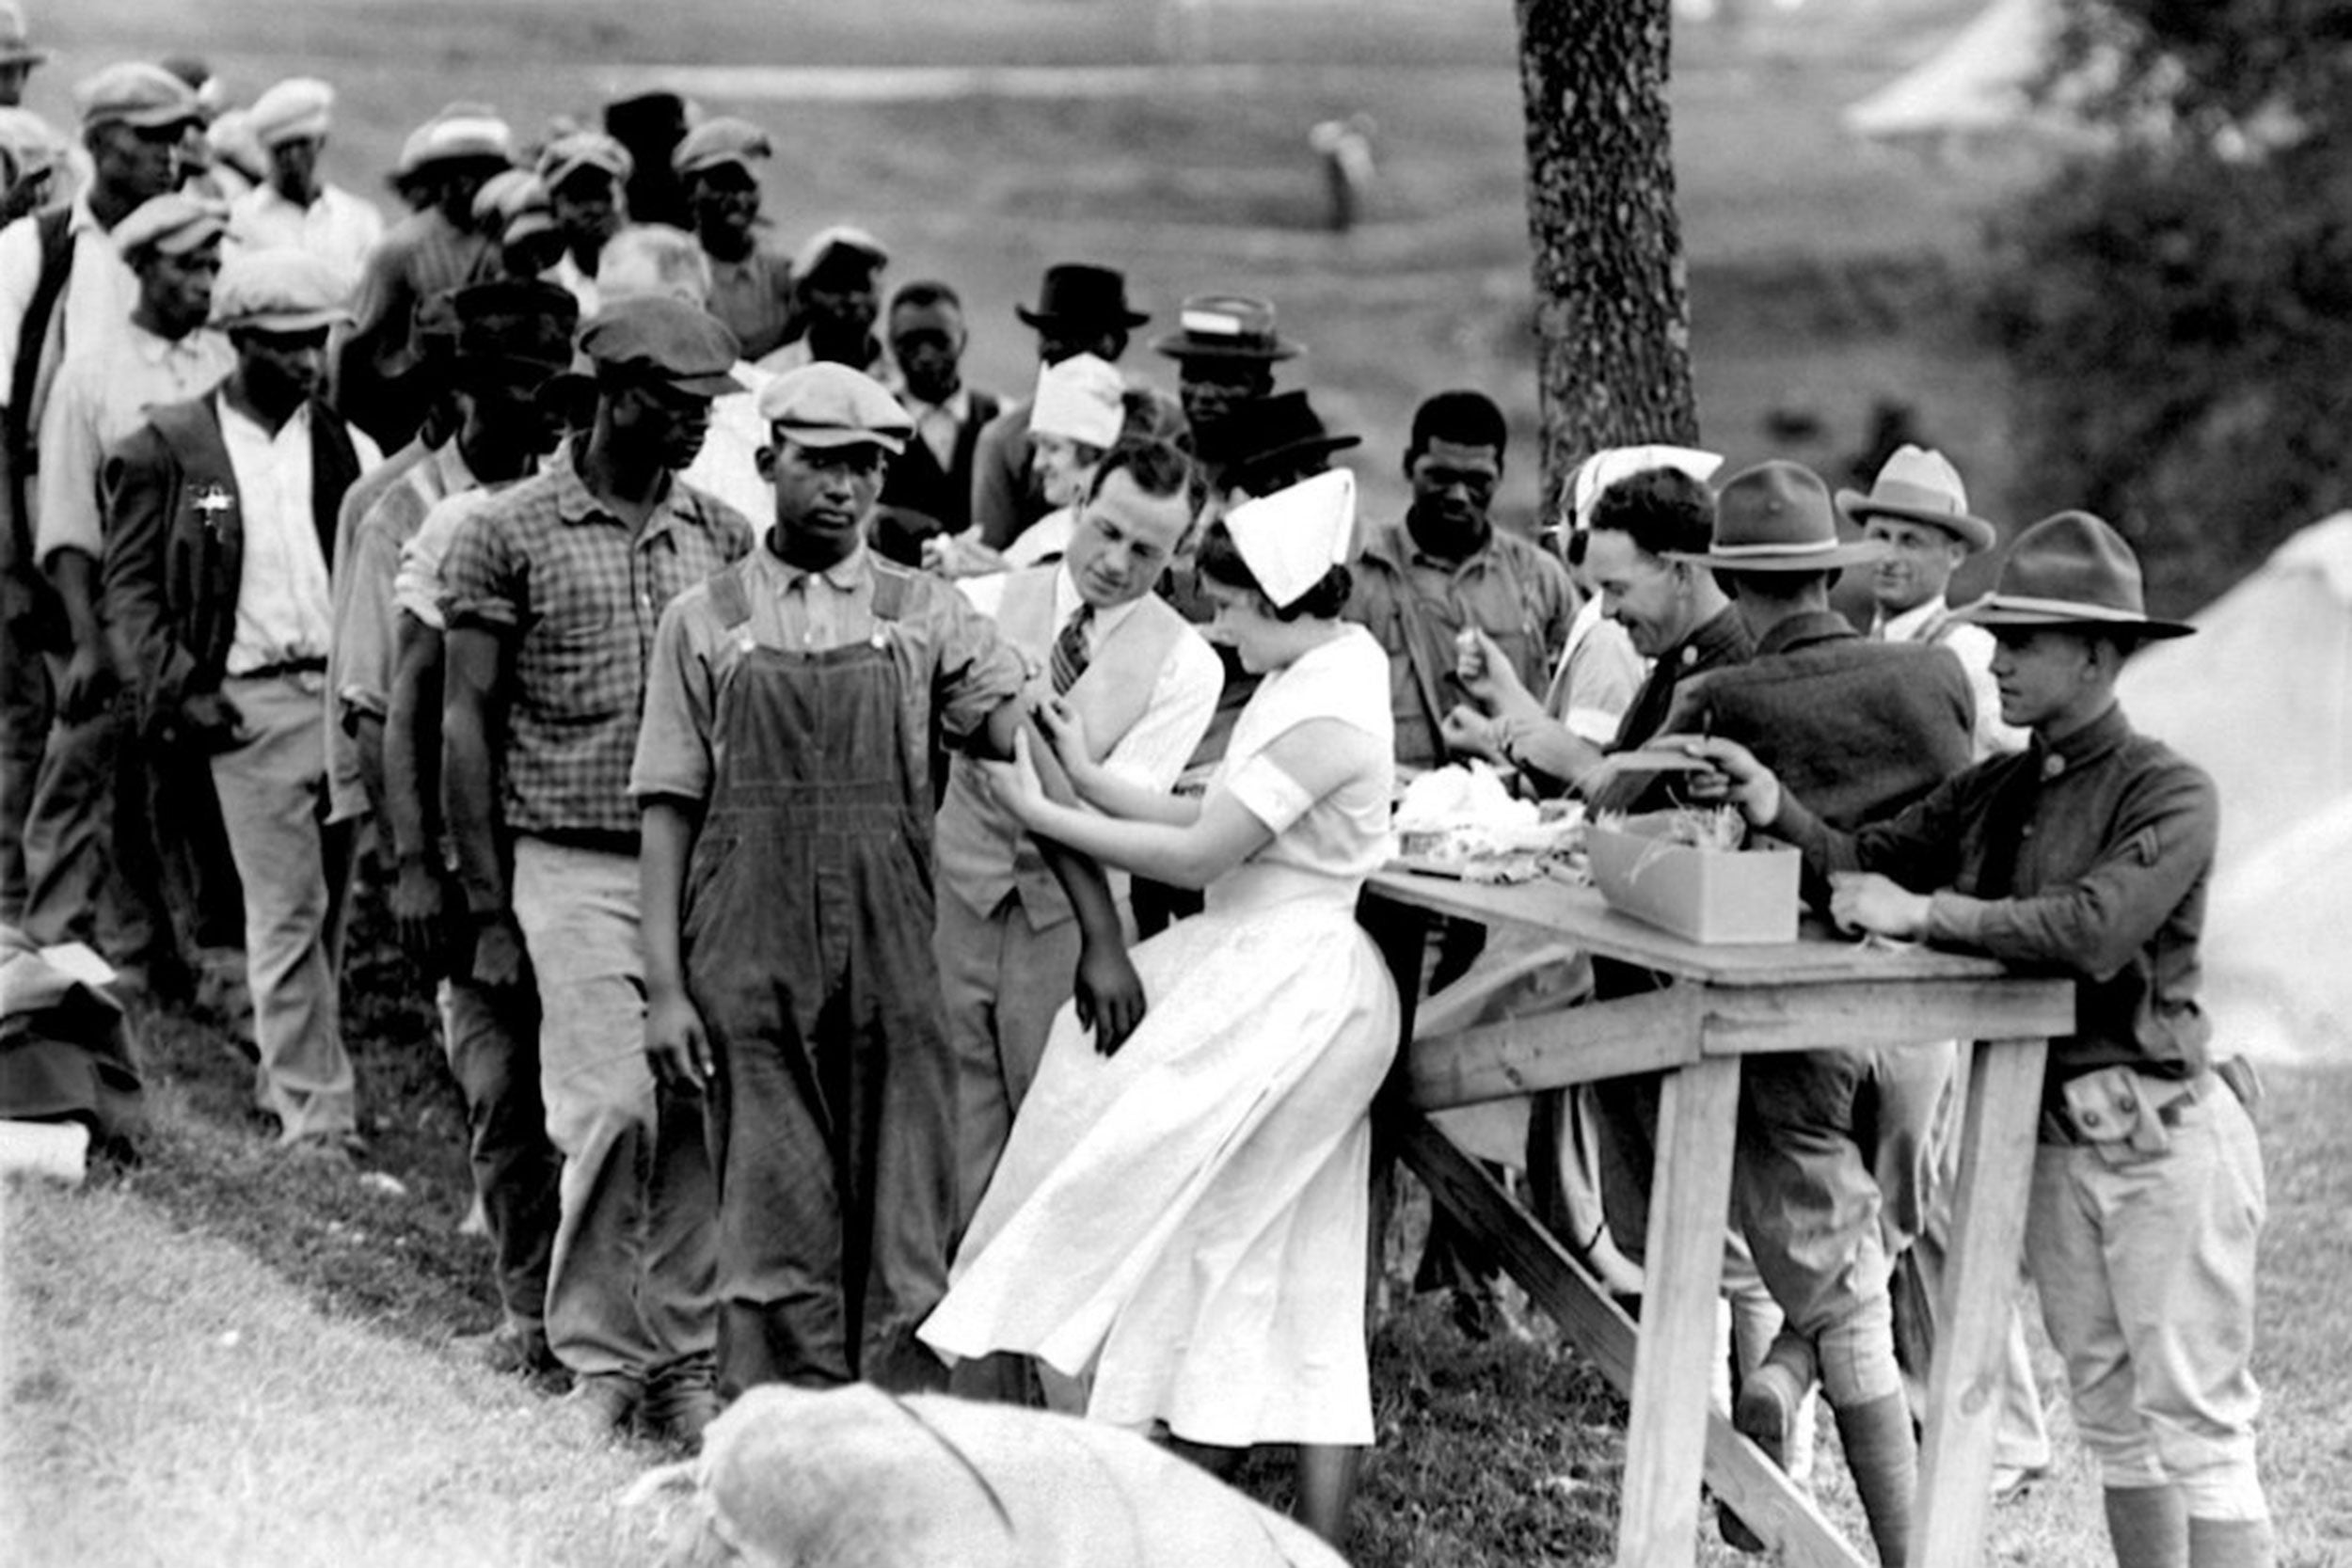 A photo from the Tuskegee Study.